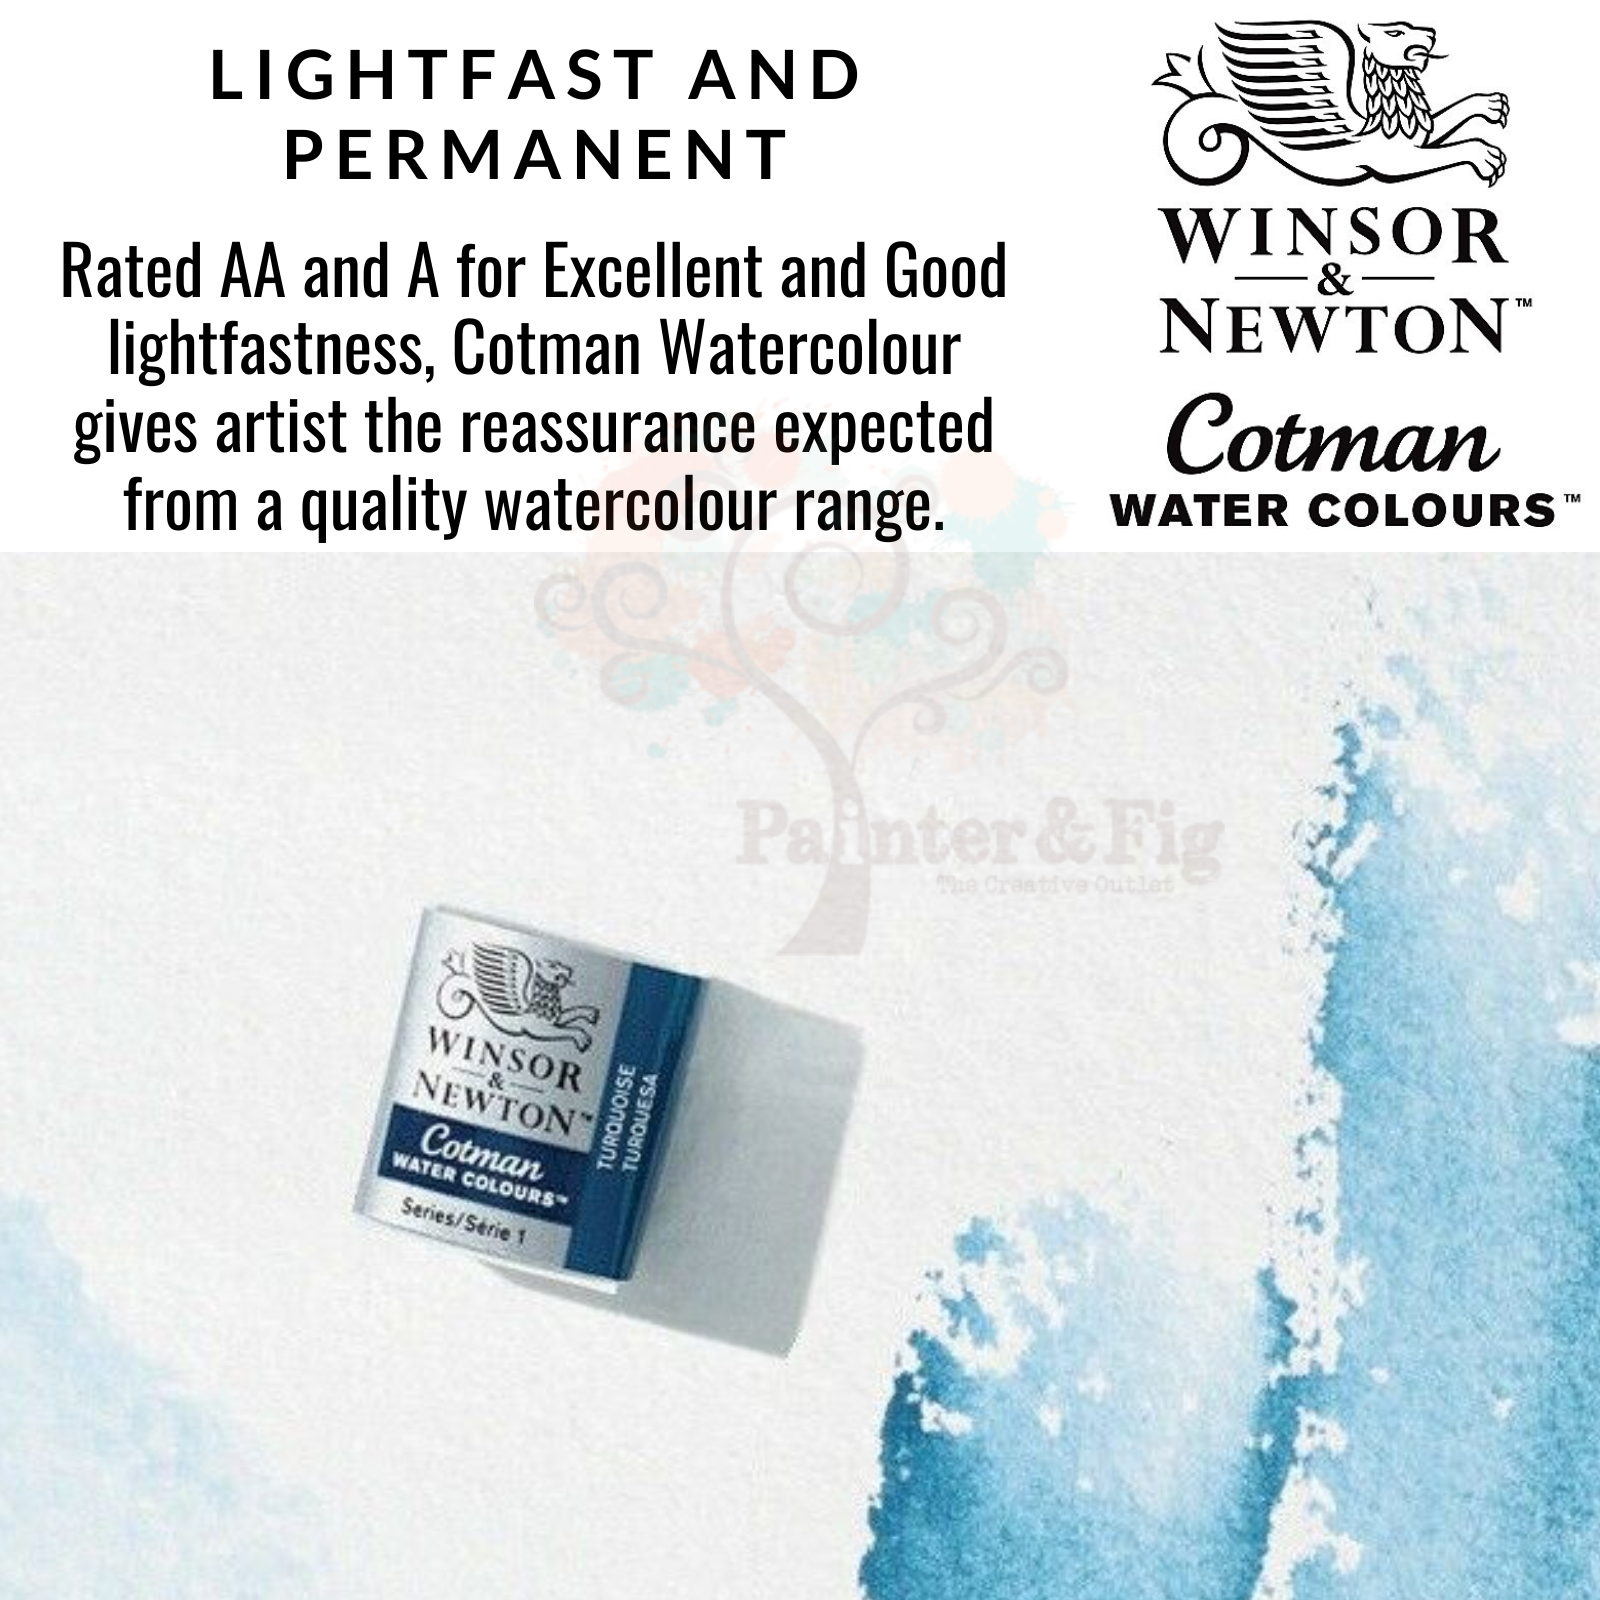 Winsor & Newton Cotman Watercolours Set Half Pans & Whole Pans - Rated AA & A for Excellent & Good lightfastness